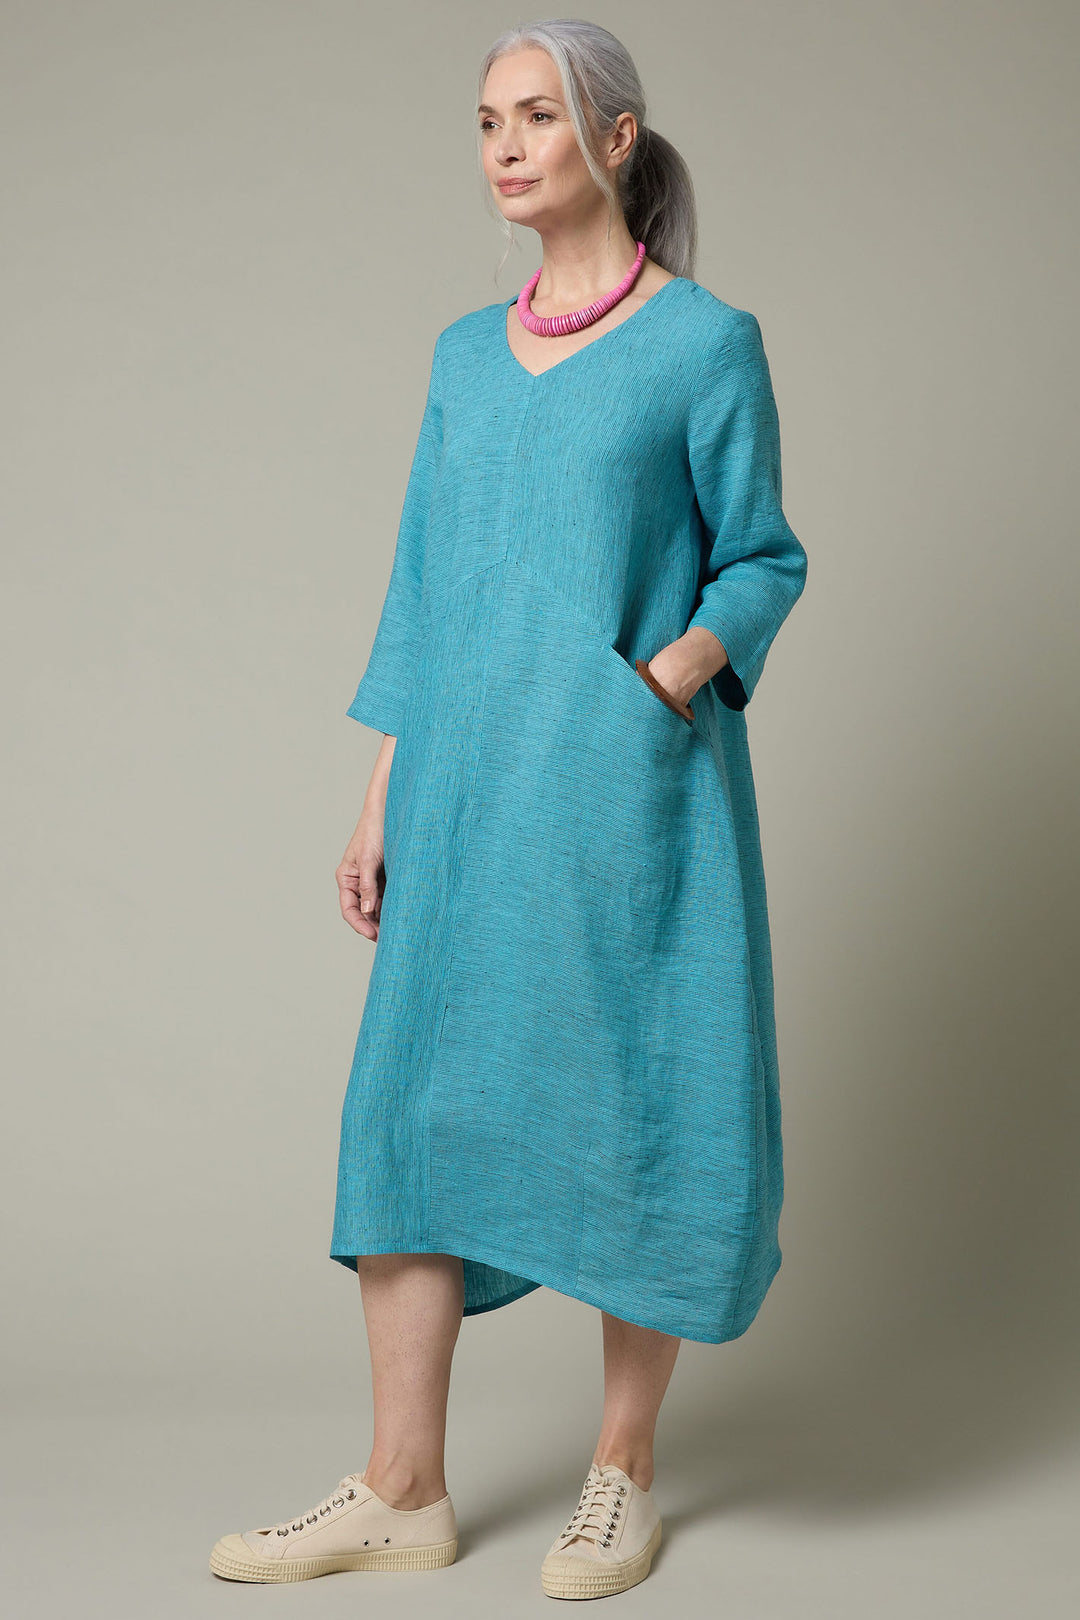 Sahara GRD5148-LTS Teal Night Linen Ticking Stripe Bubble Dress - Experience Boutique